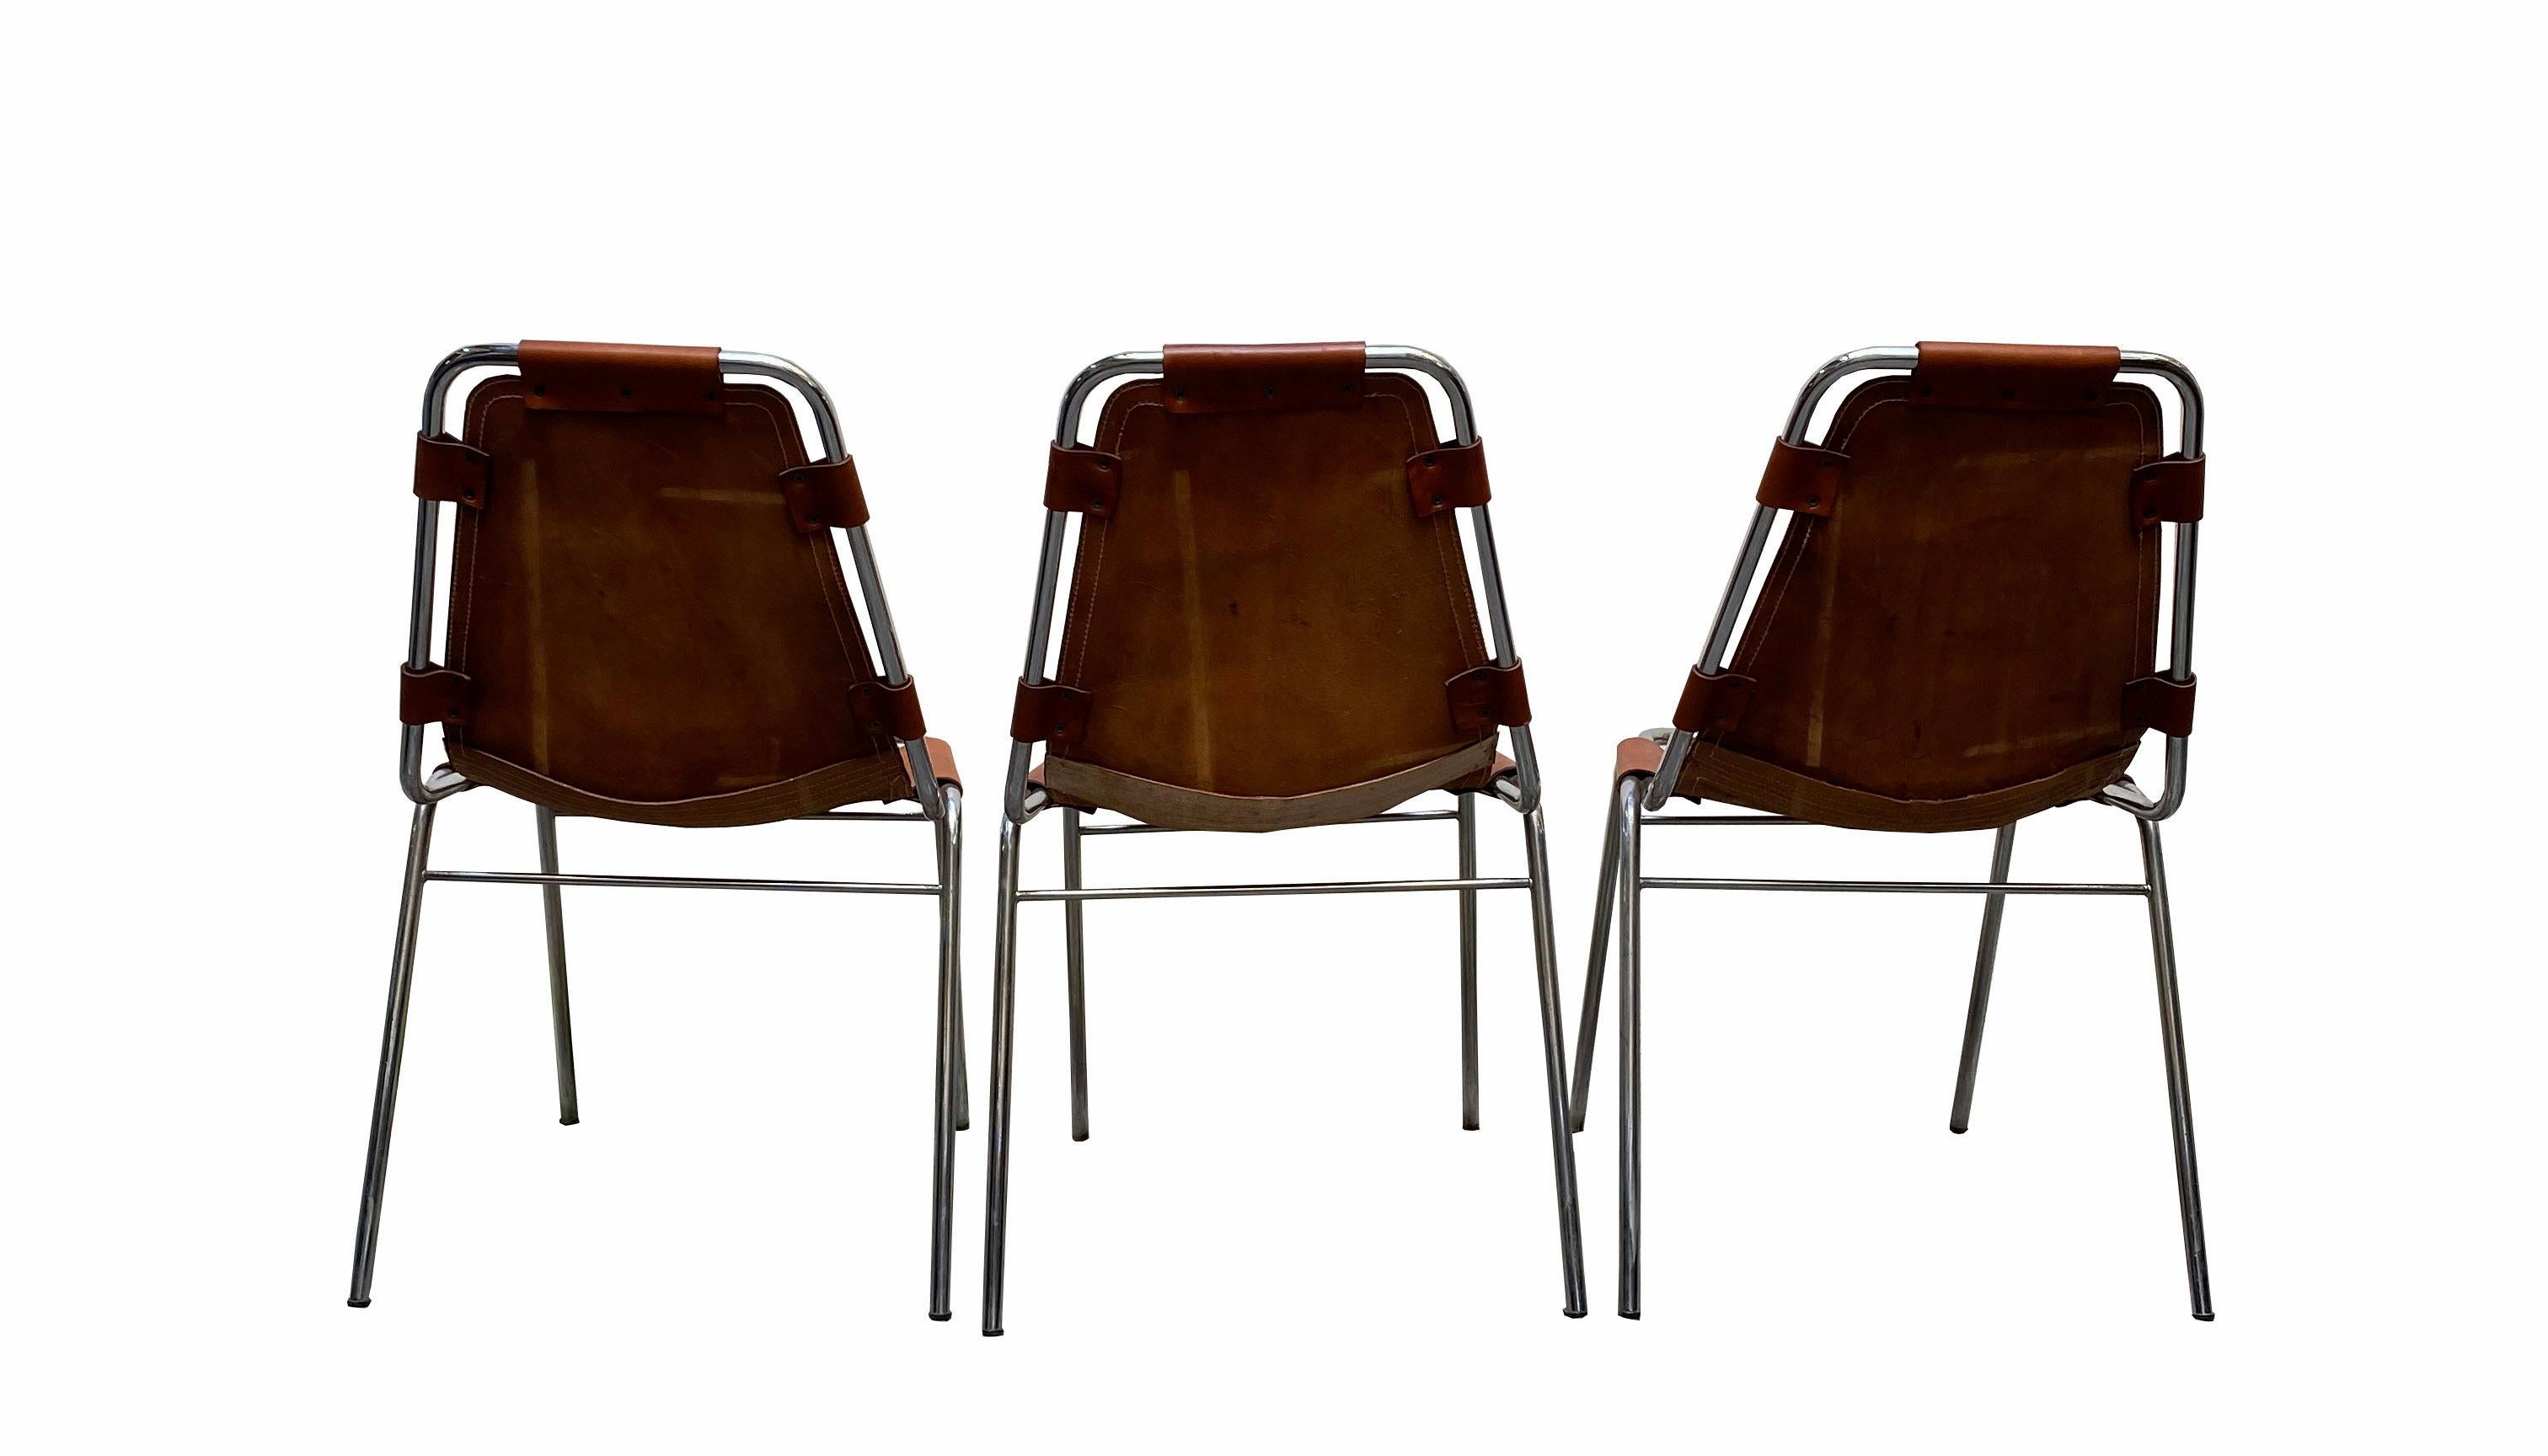 Adam Style Chairs 'Les Arcs' Charlotte Perriand, Cognac Leather Chromed Metal, Italy 1970s